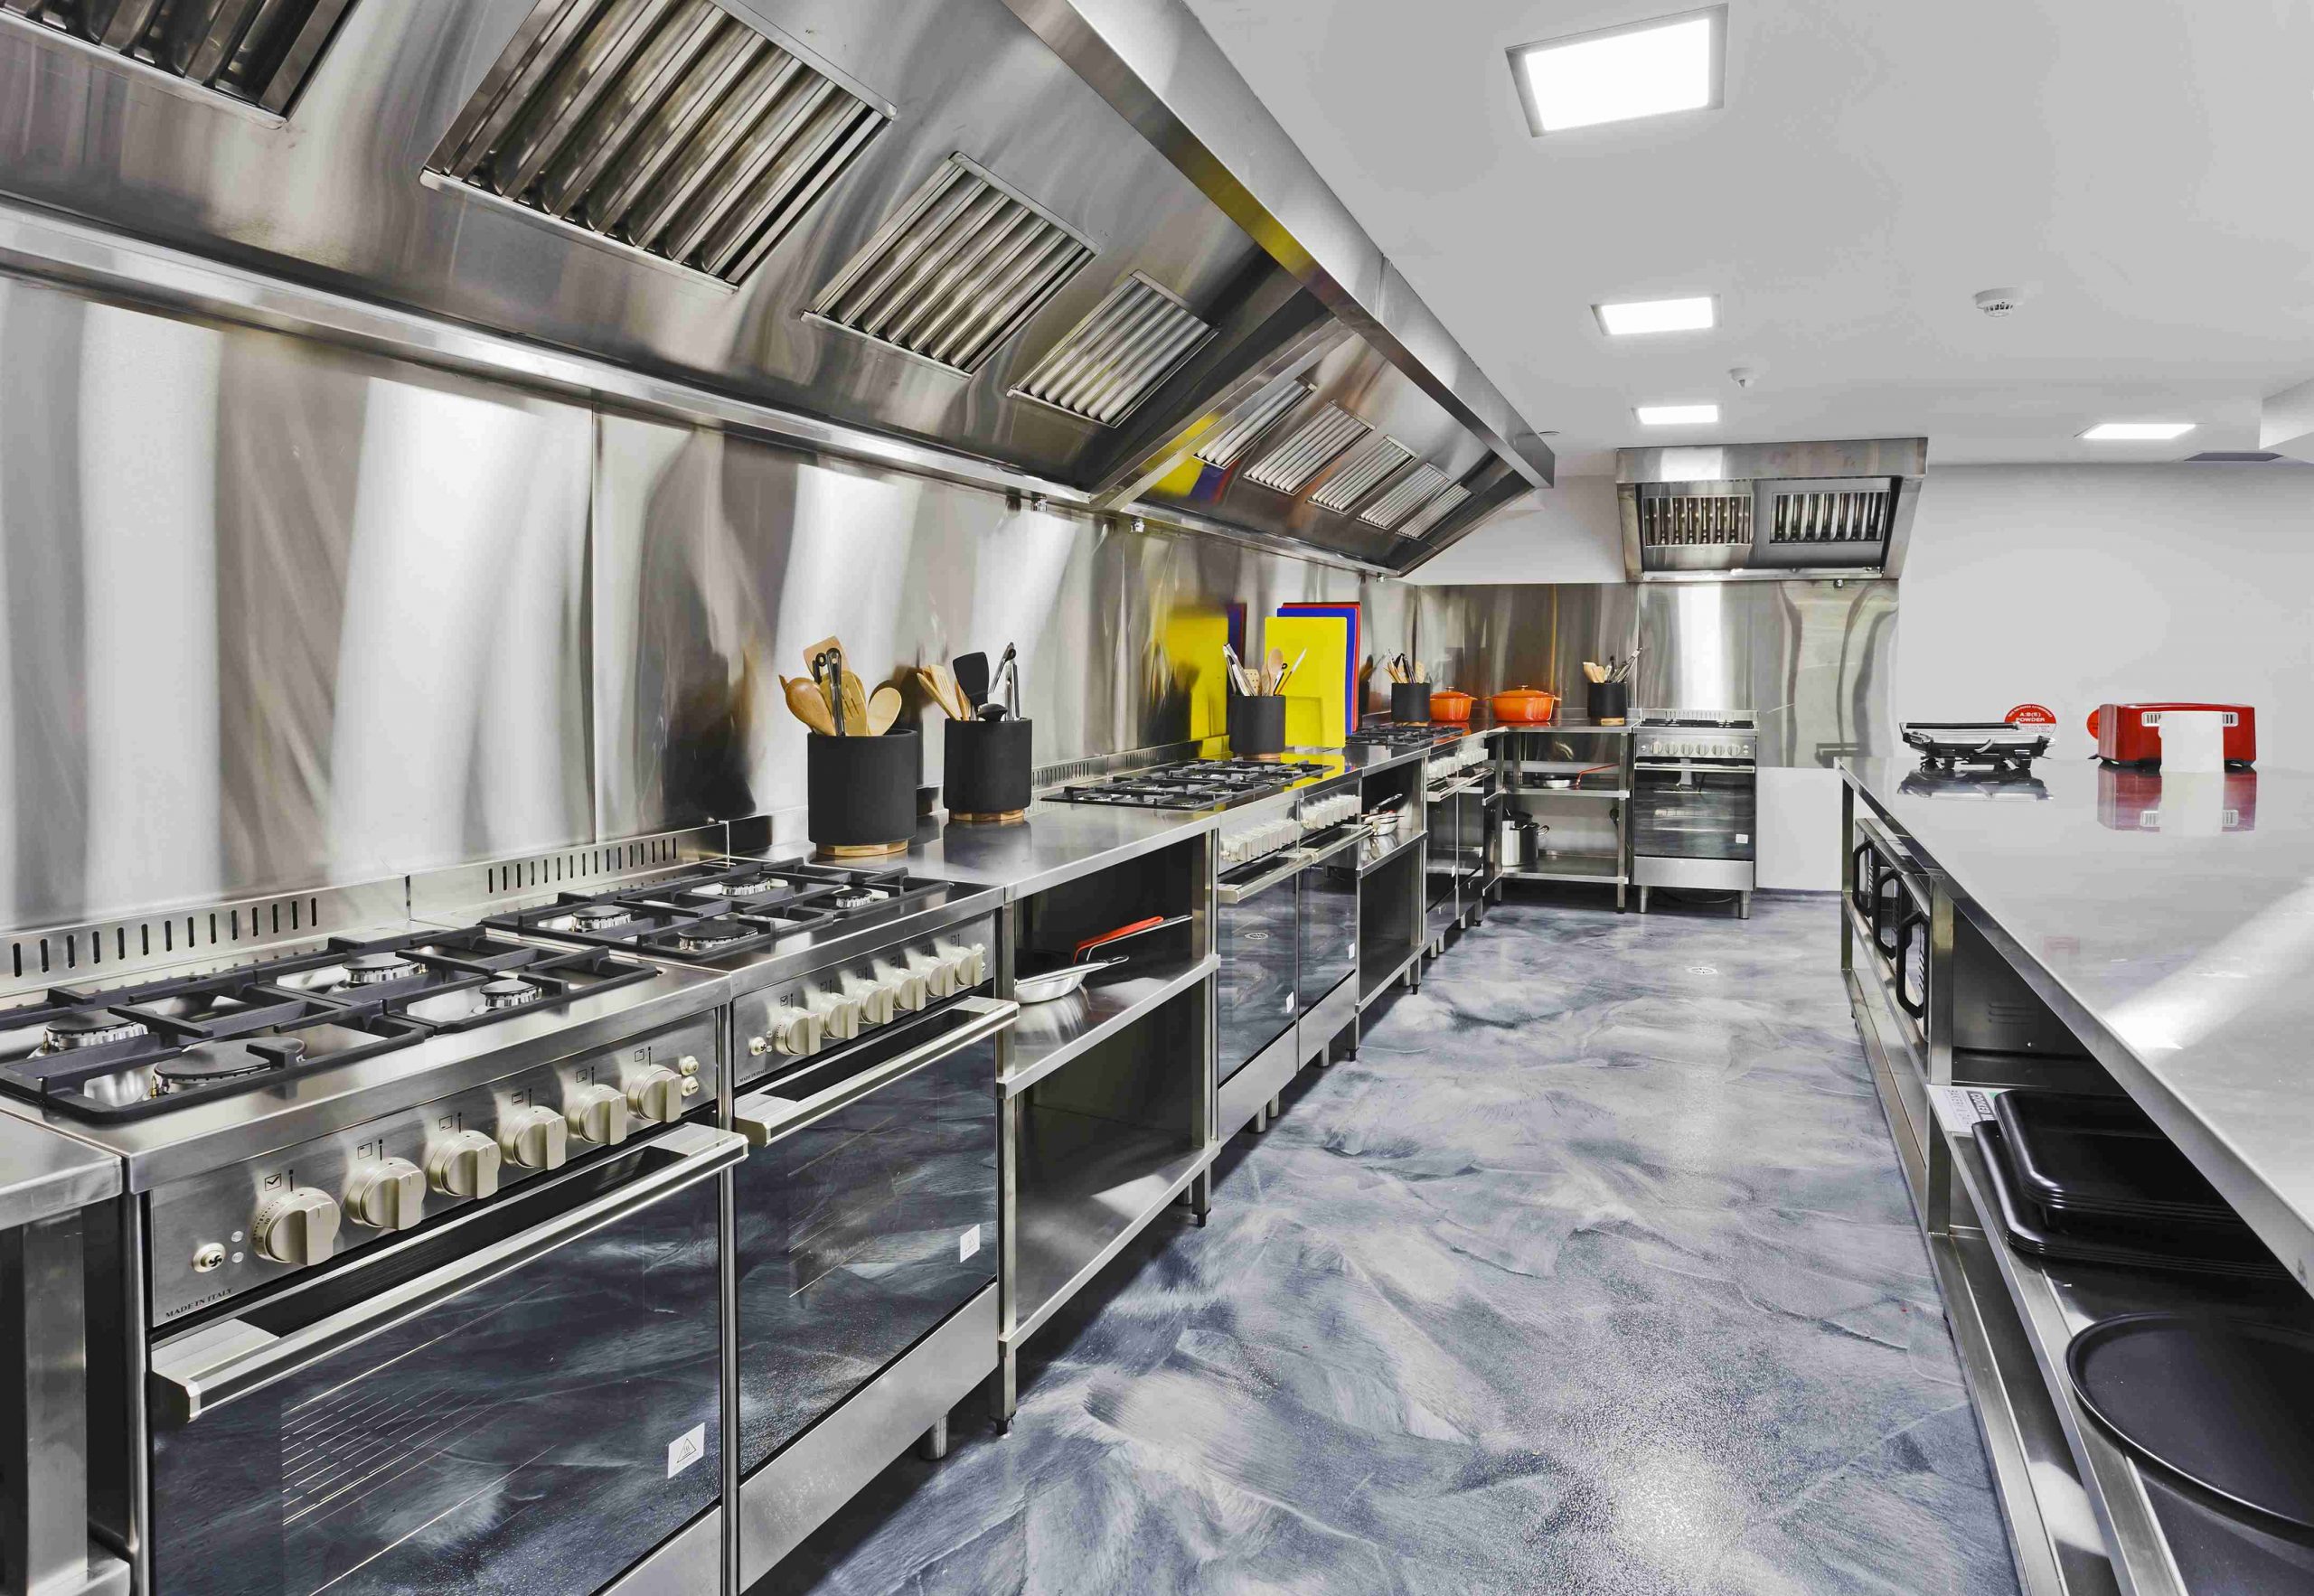 Genuine and Reliable Spare Parts for Your Commercial Kitchen